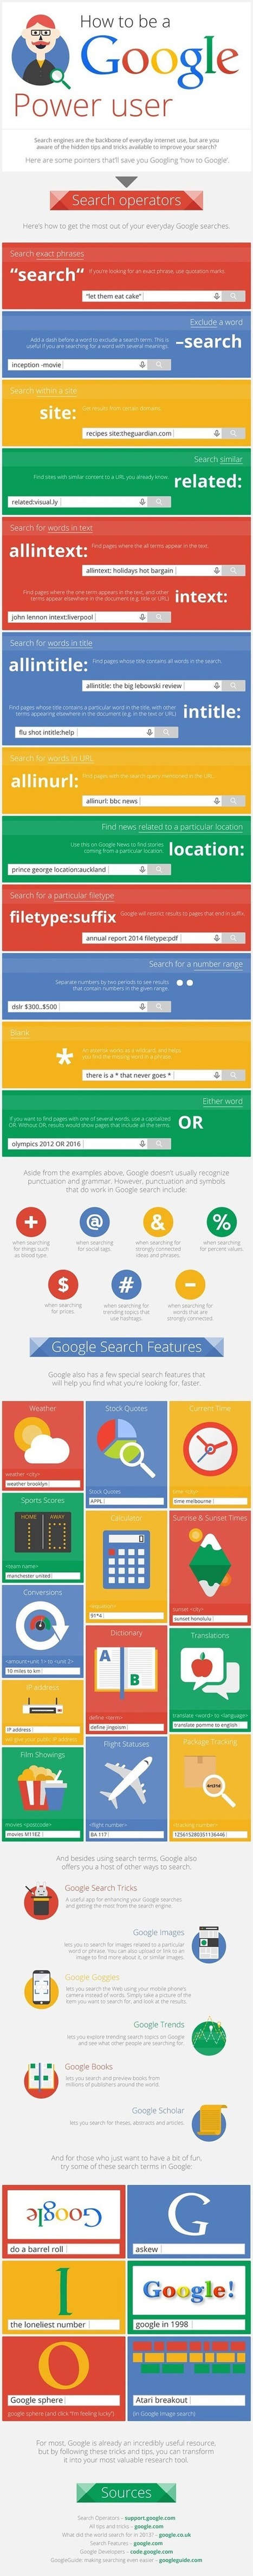 46 Hidden Tips and Tricks to Use Google Search Like a Boss: Infographic | Business Improvement and Social media | Scoop.it